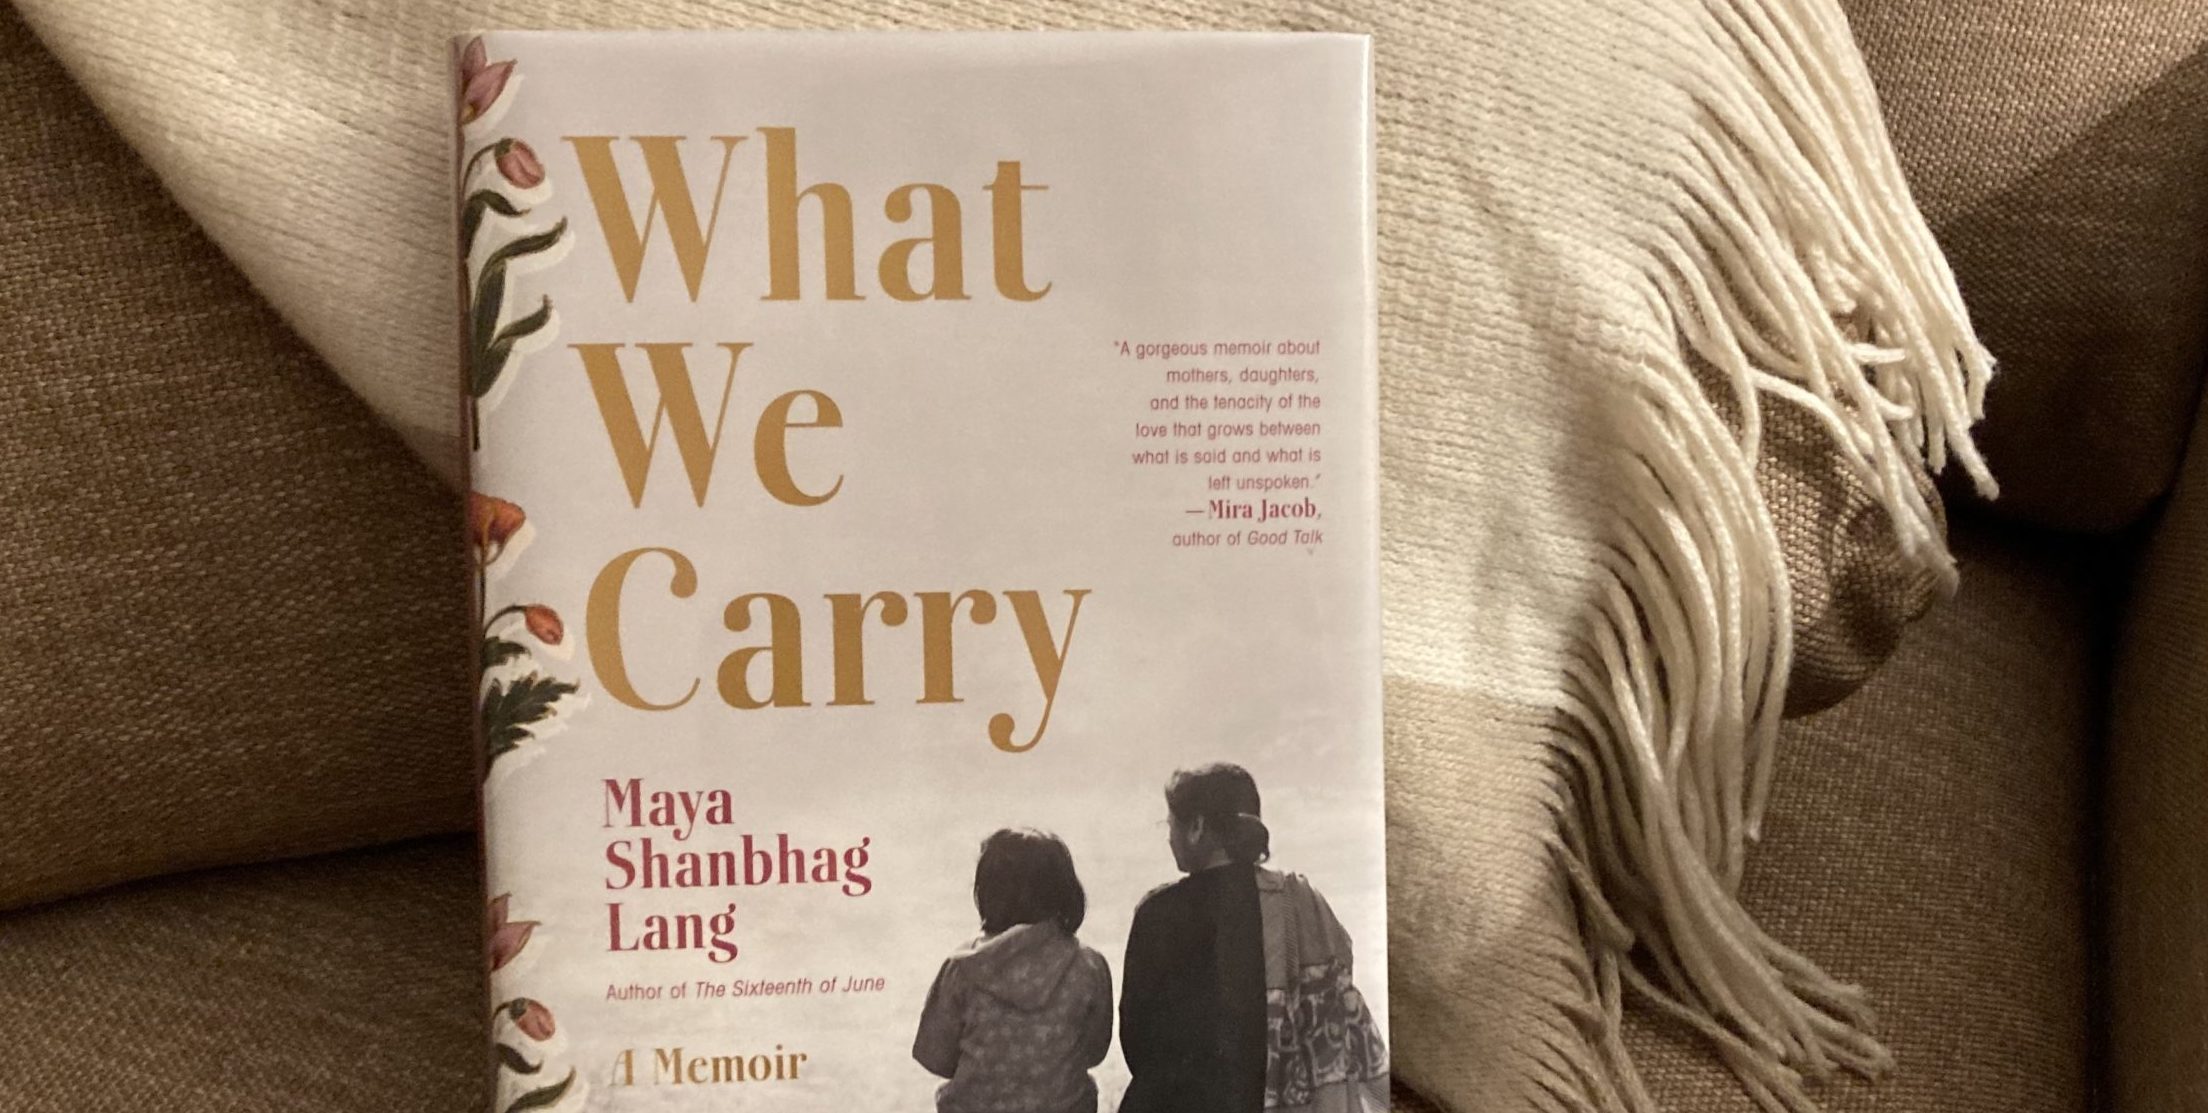 What We Carry by Maya Shanbhag Lang